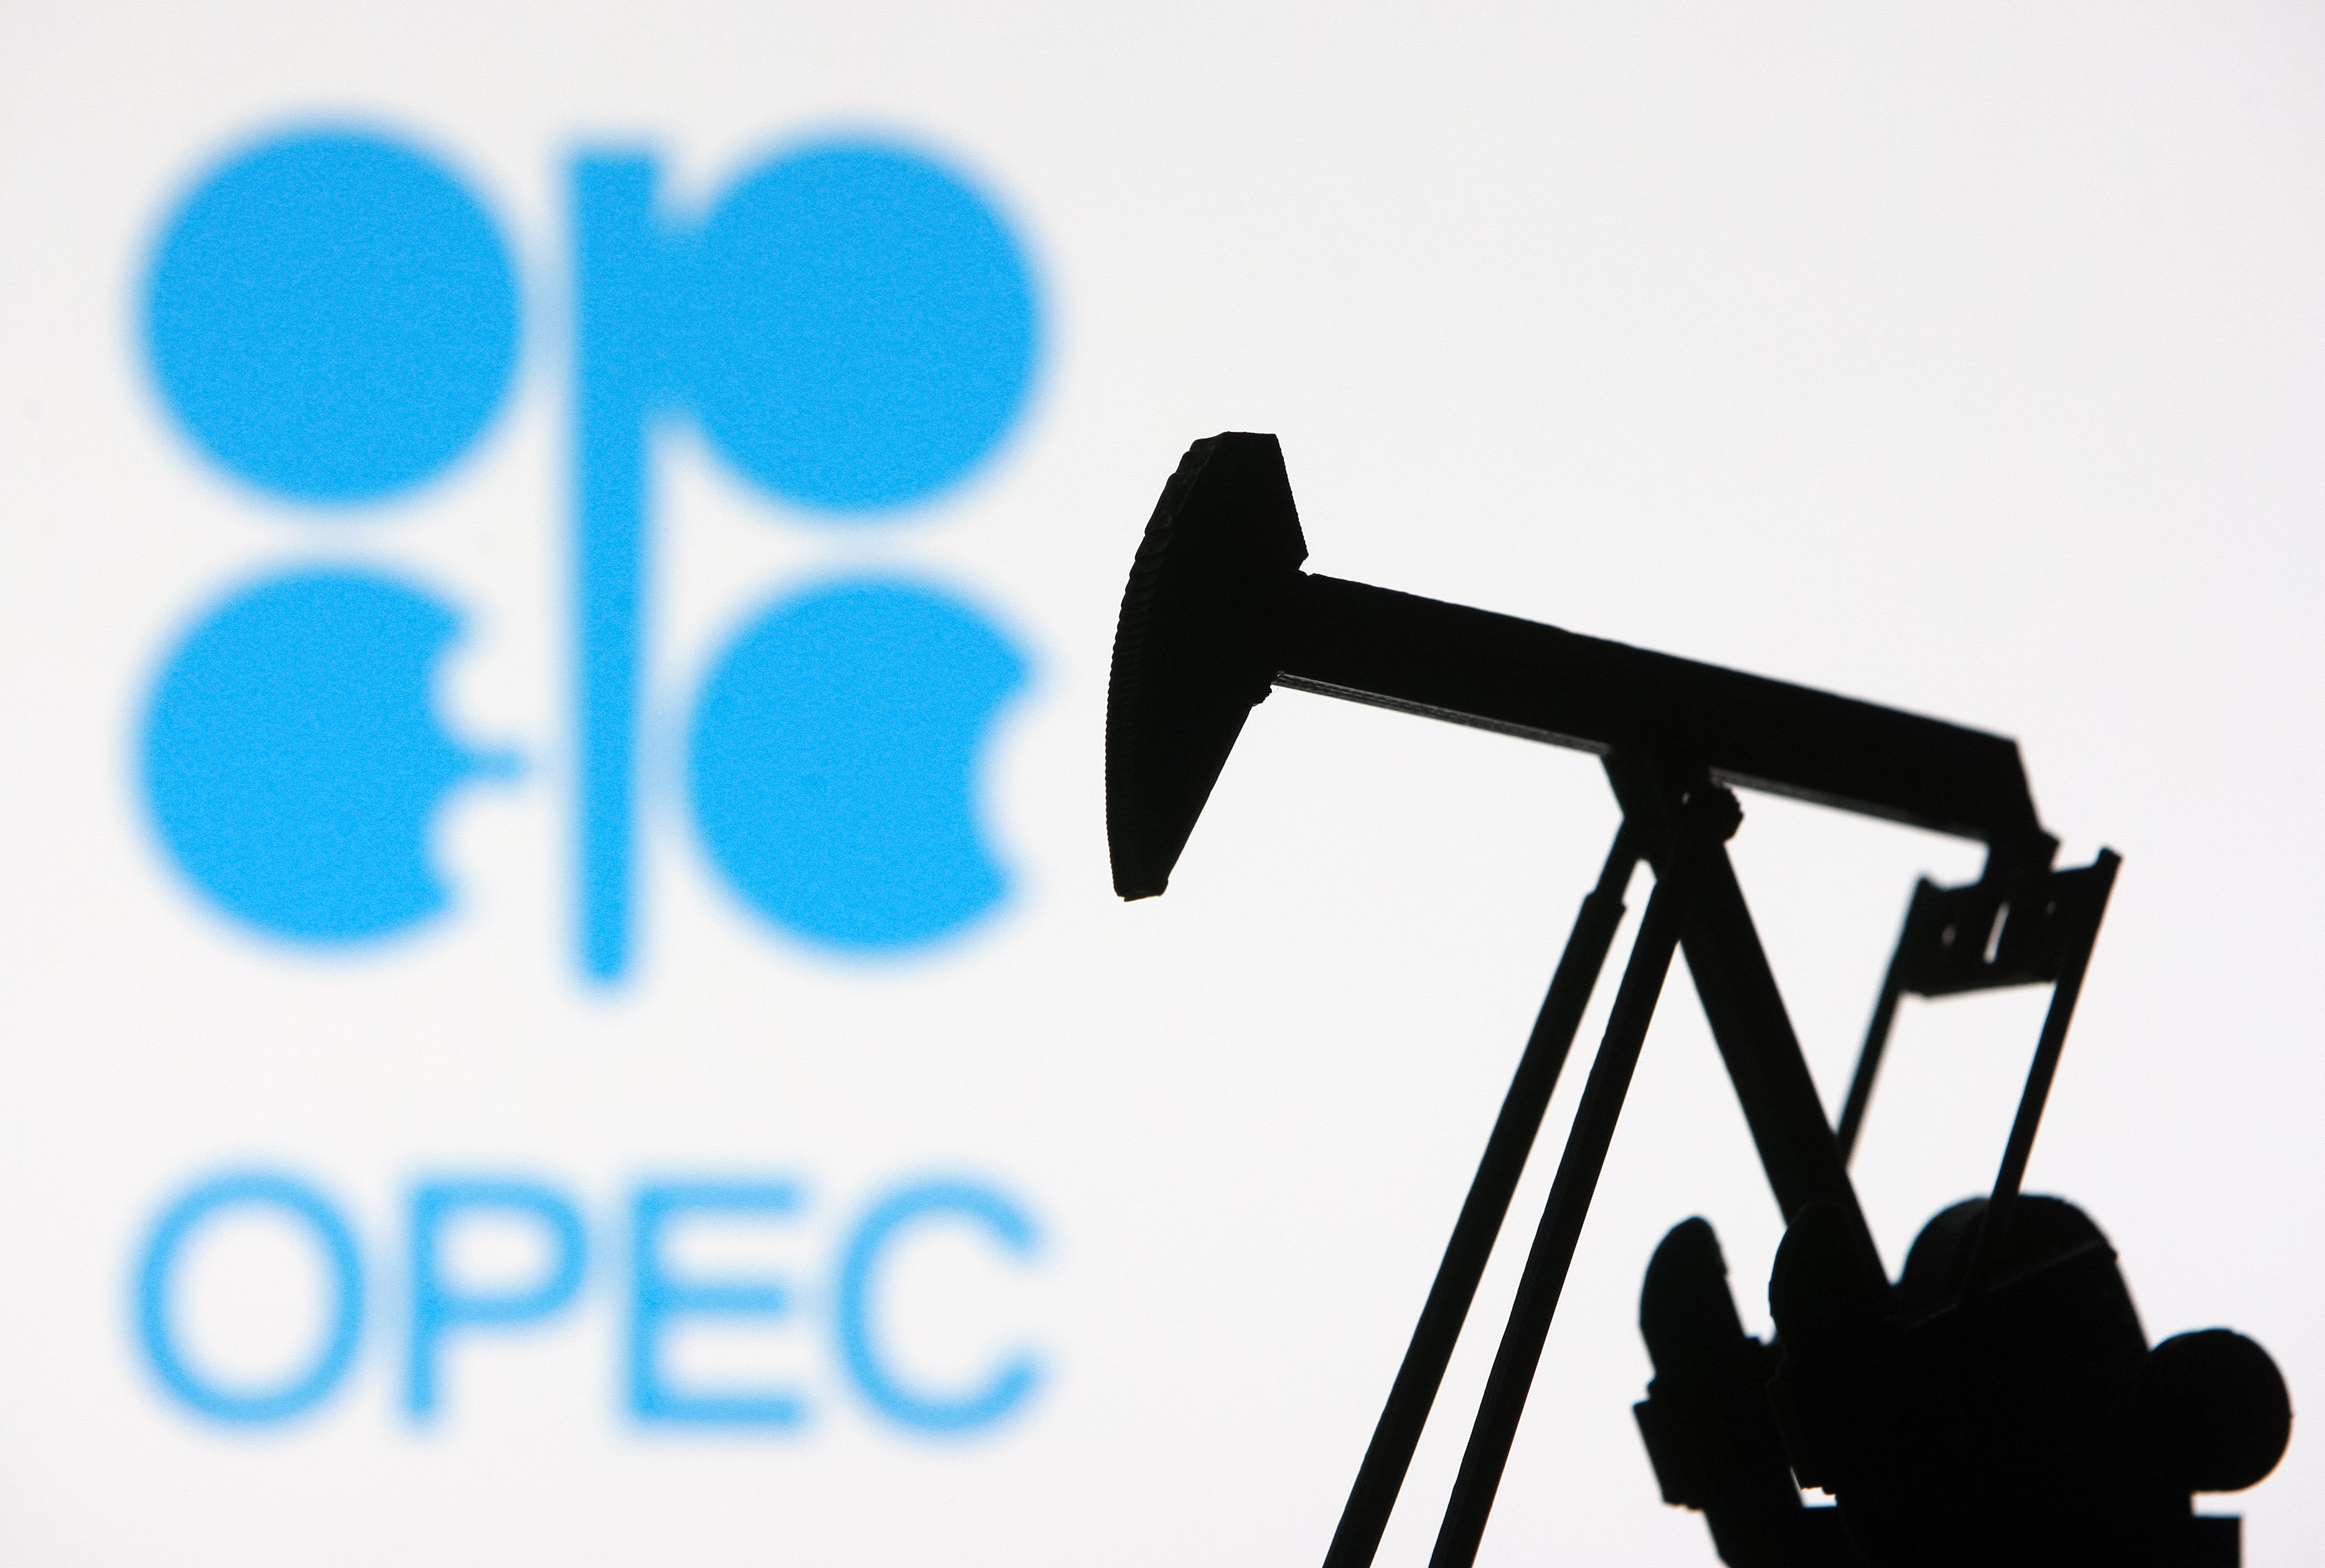 UAE leader hosts phone call with Russian Counterpart around OPEC+, oil price limit